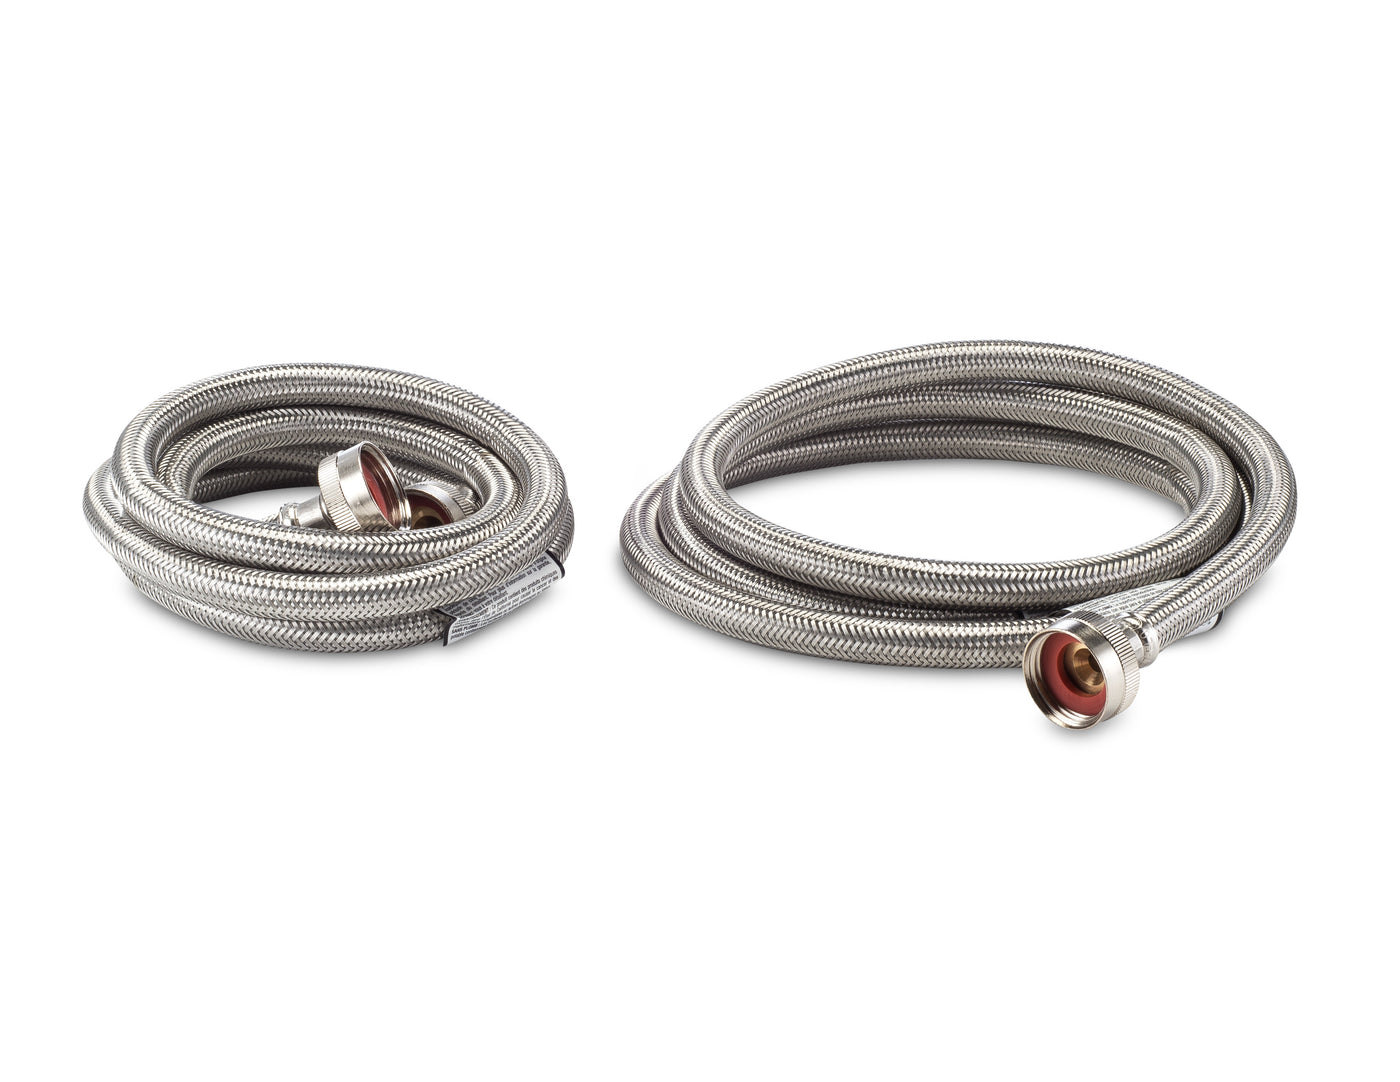 Smart Choice 6 ft. Braided Stainless Steel Washer Fill Hose - 2 Pack